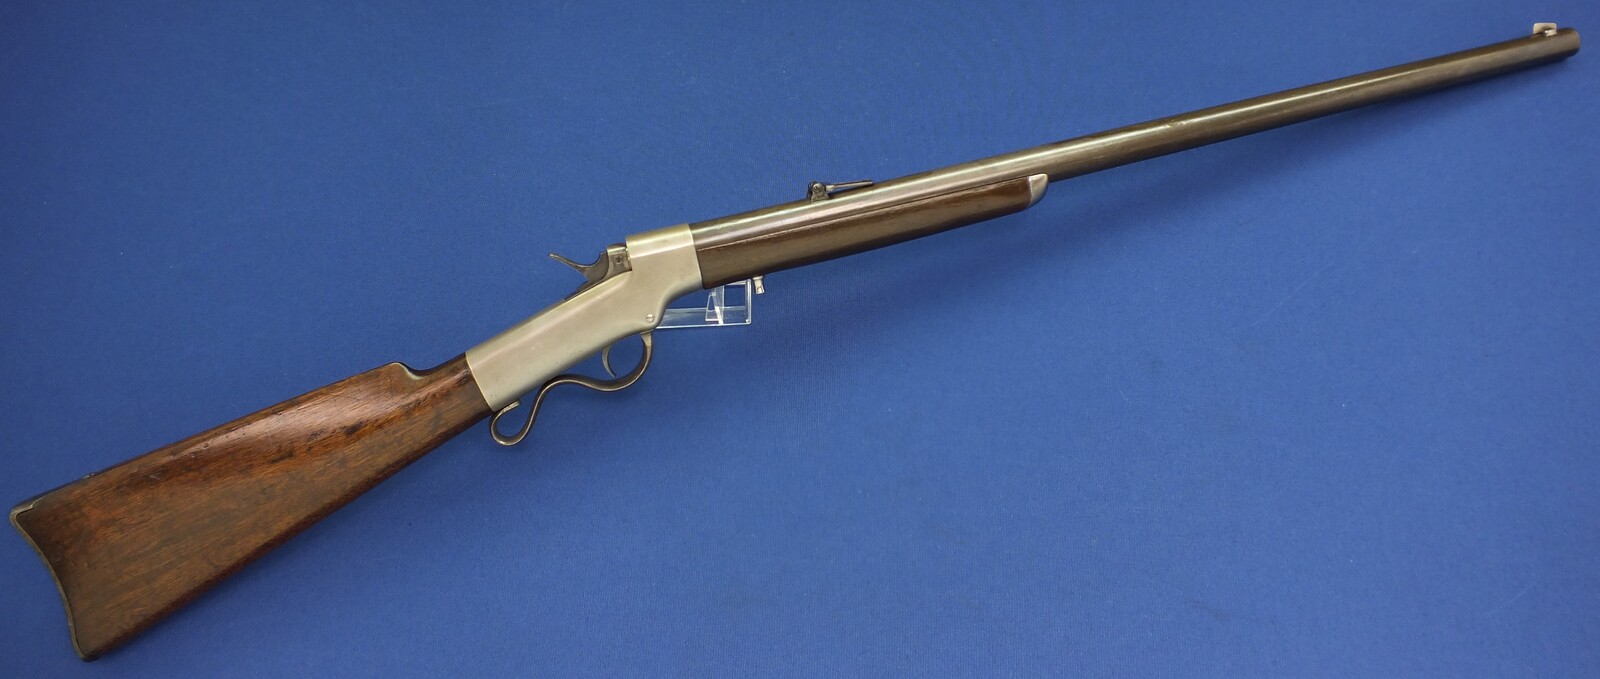 A rare antique American External Extractor Marlin Ballard Hunter's Rifle with reversible Firing-Pin. Caliber 44 Rimfire and Centerfire. 27,5 inch round barrel. Length 110cm. Only 300 made. In very good condition. Price 2.750 euro.